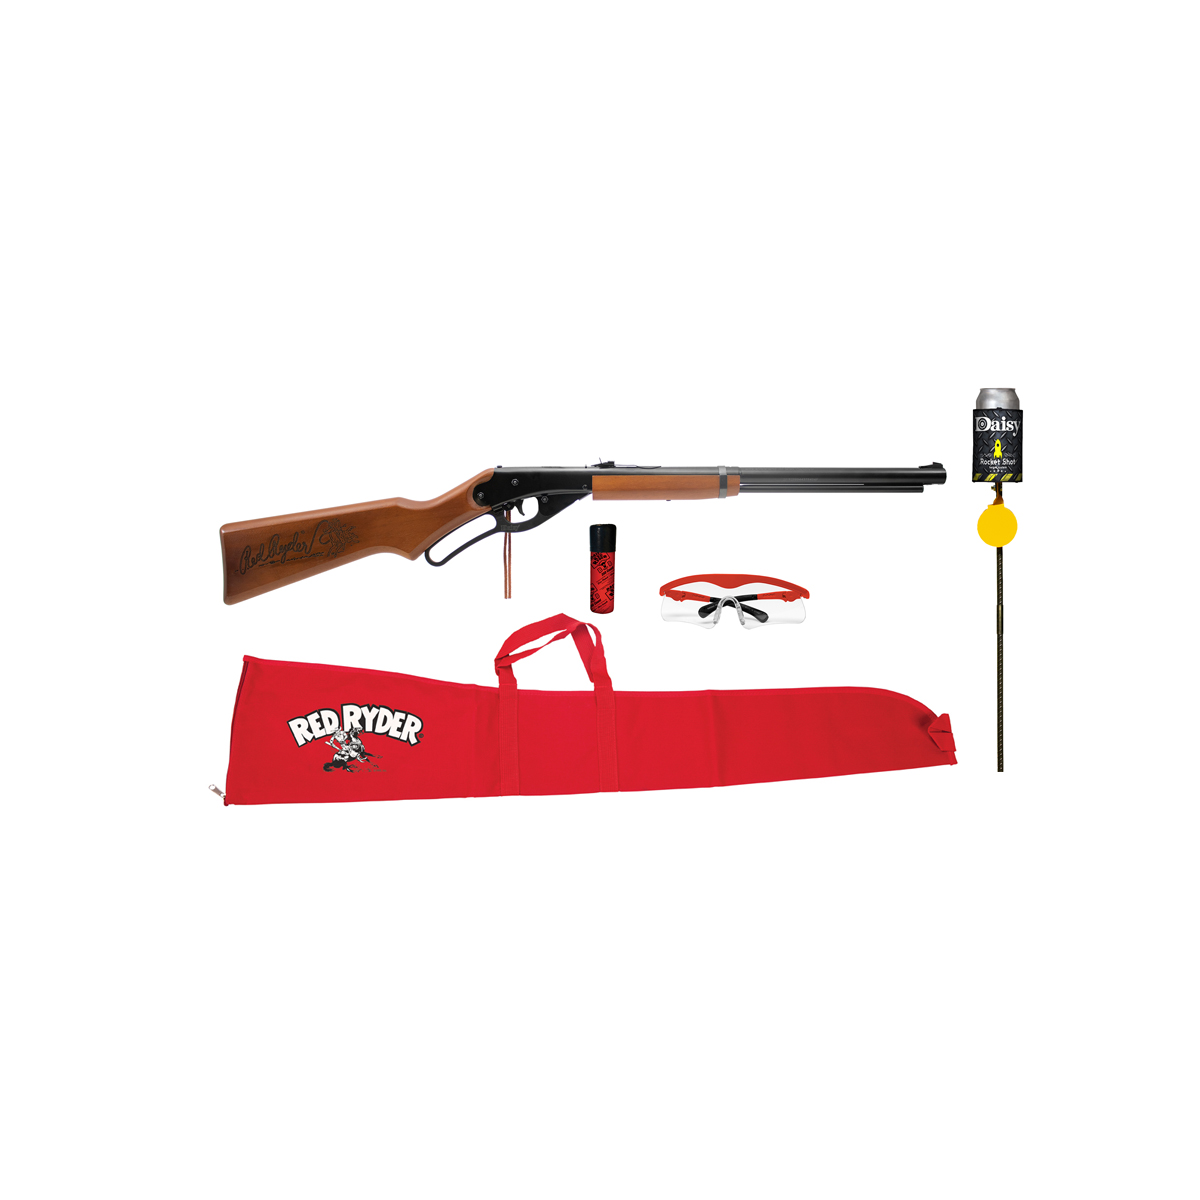 Adult Sized Daisy Red Ryder BB Gun.